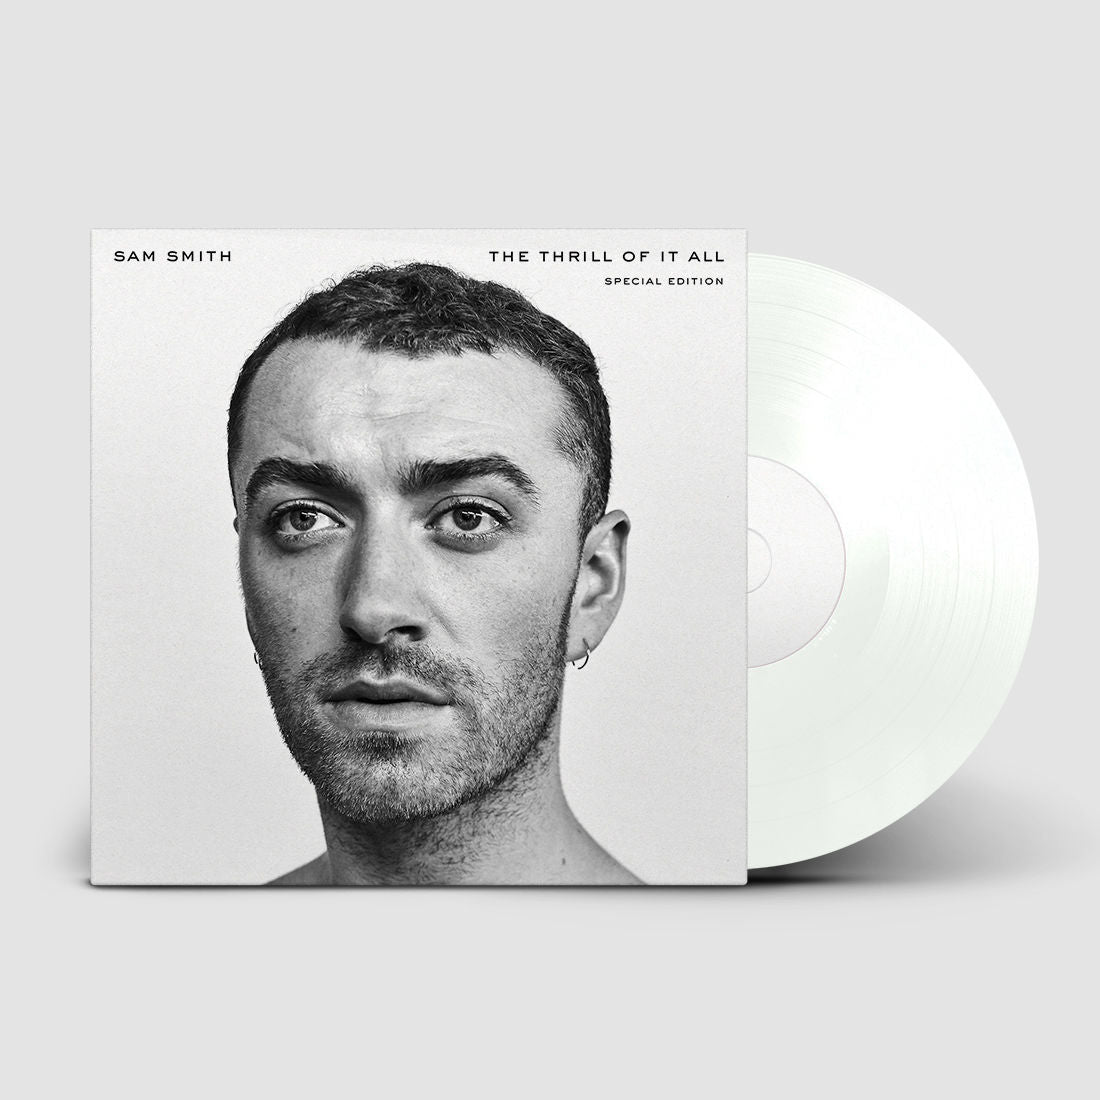 Sam Smith - The Thrill Of It All Double White LP (Special Edition)